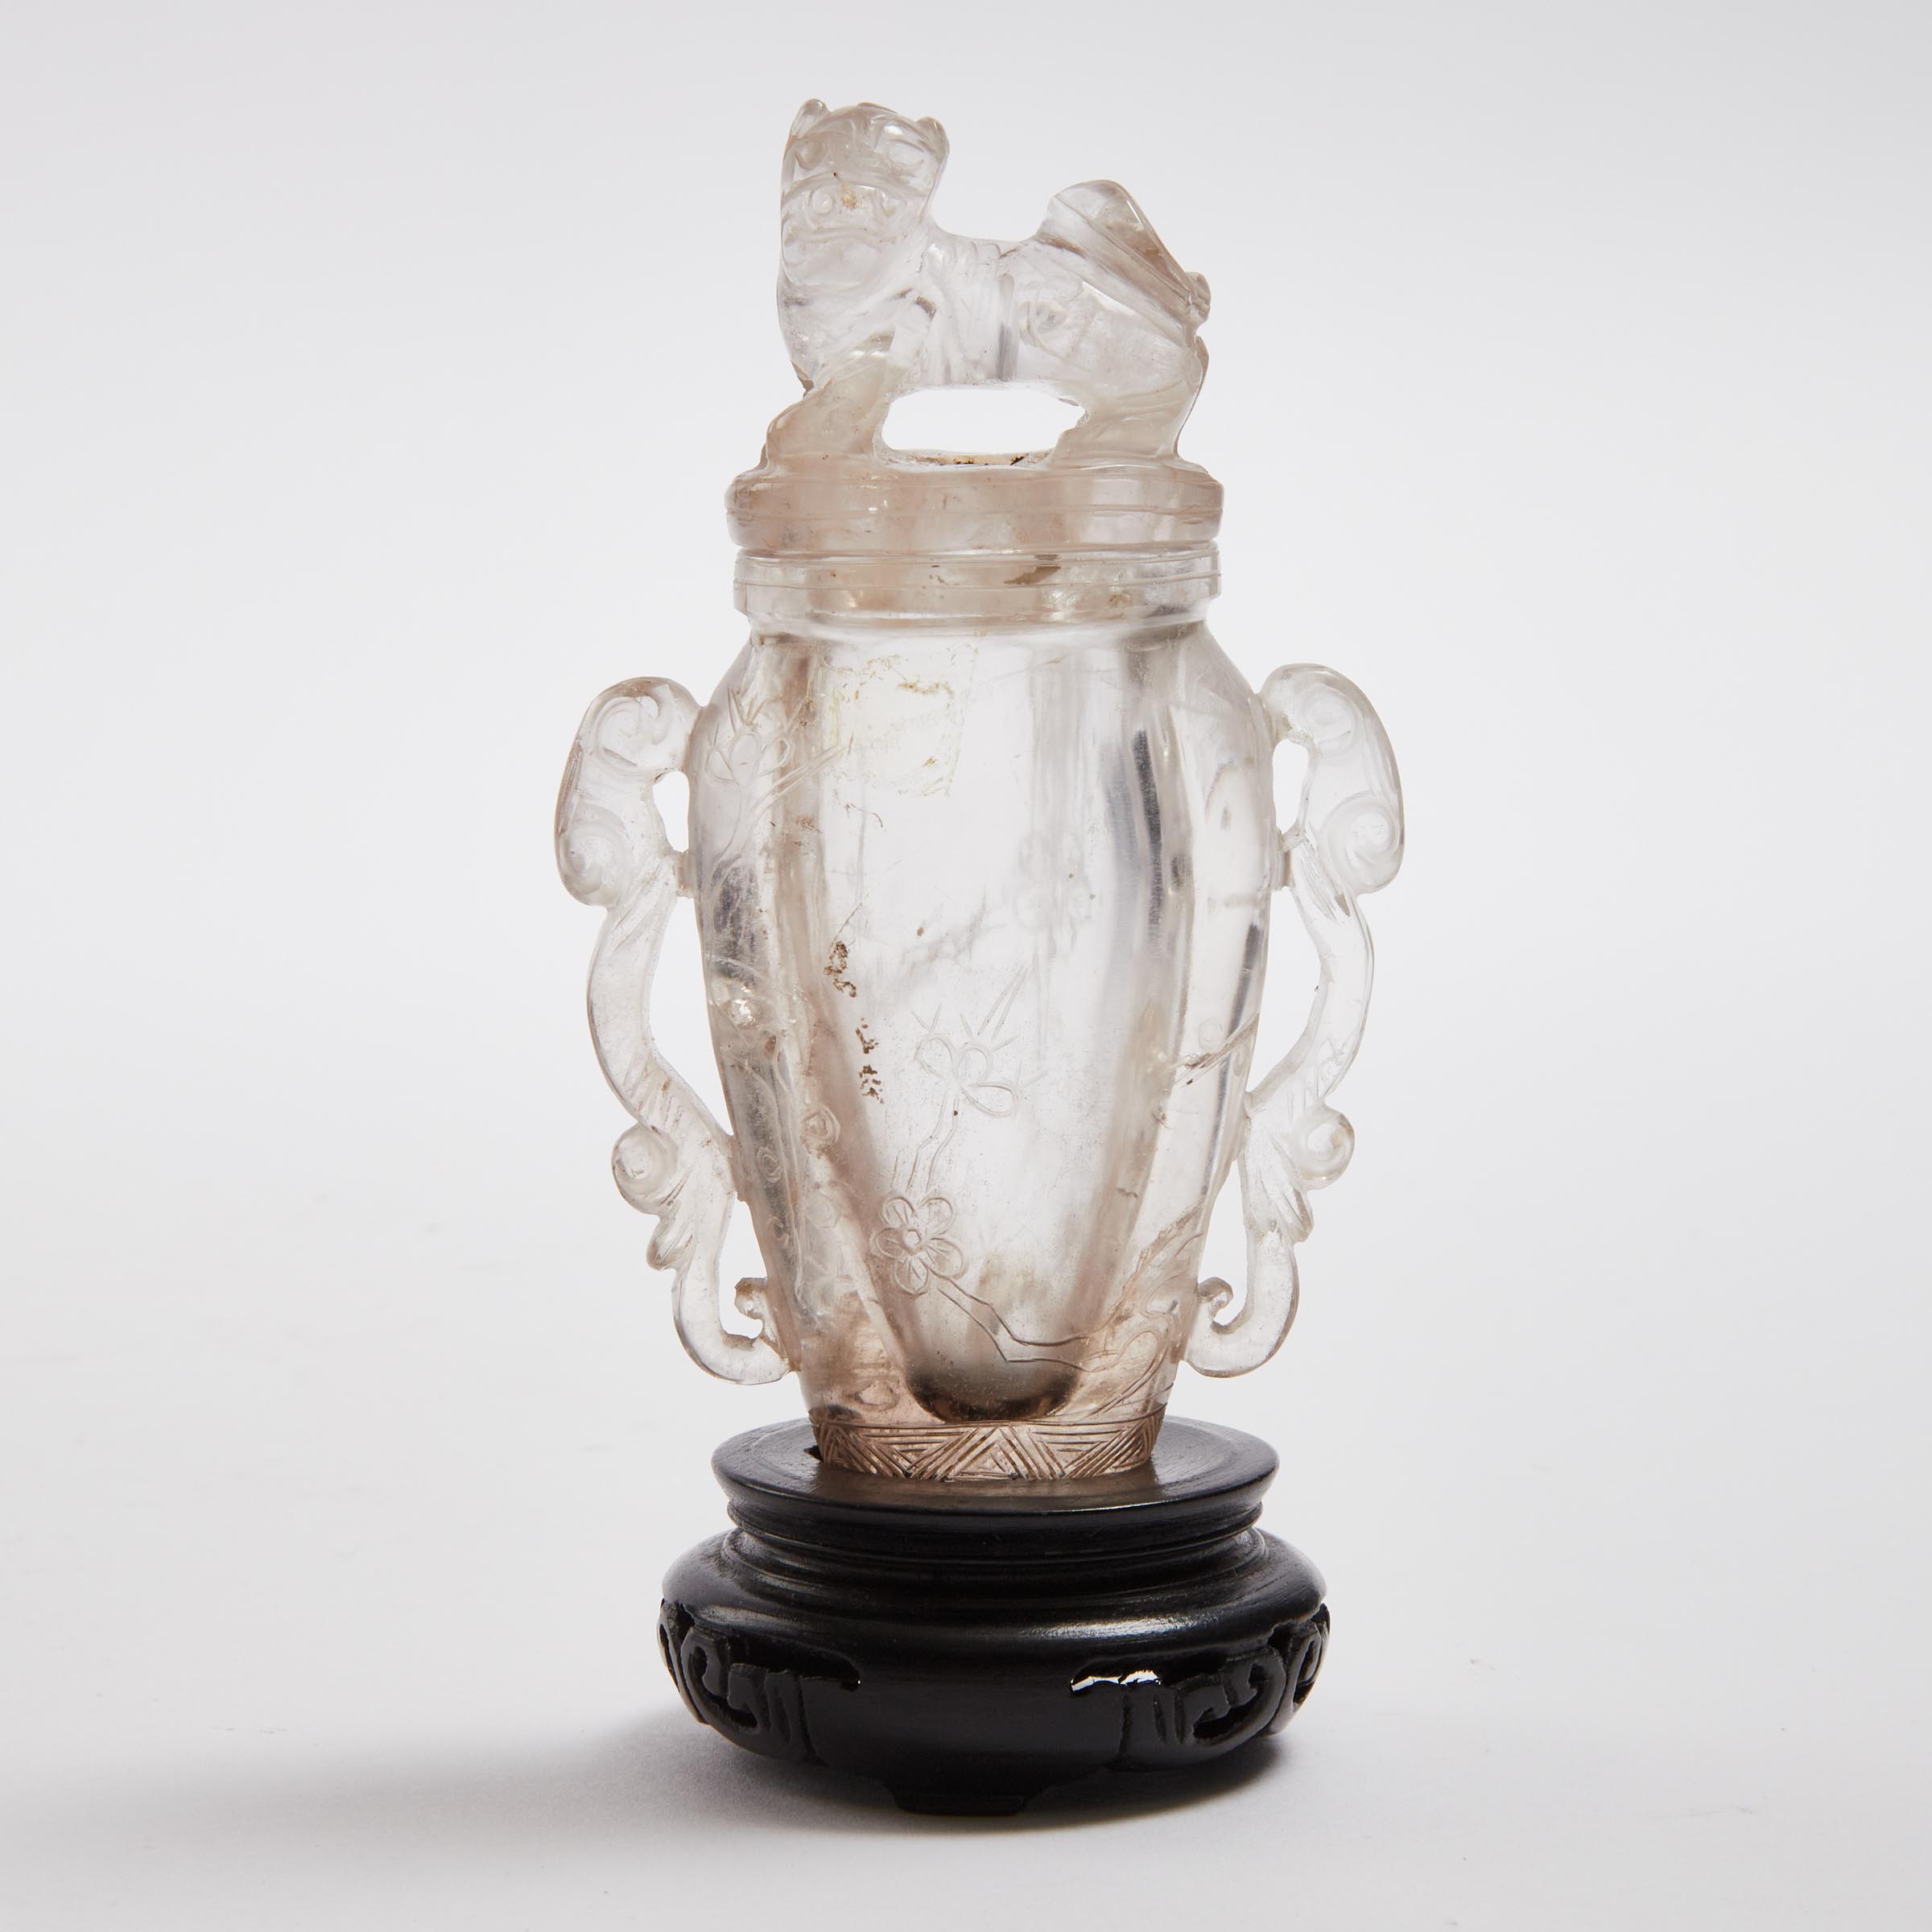 A Miniature Rock Crystal Vase and